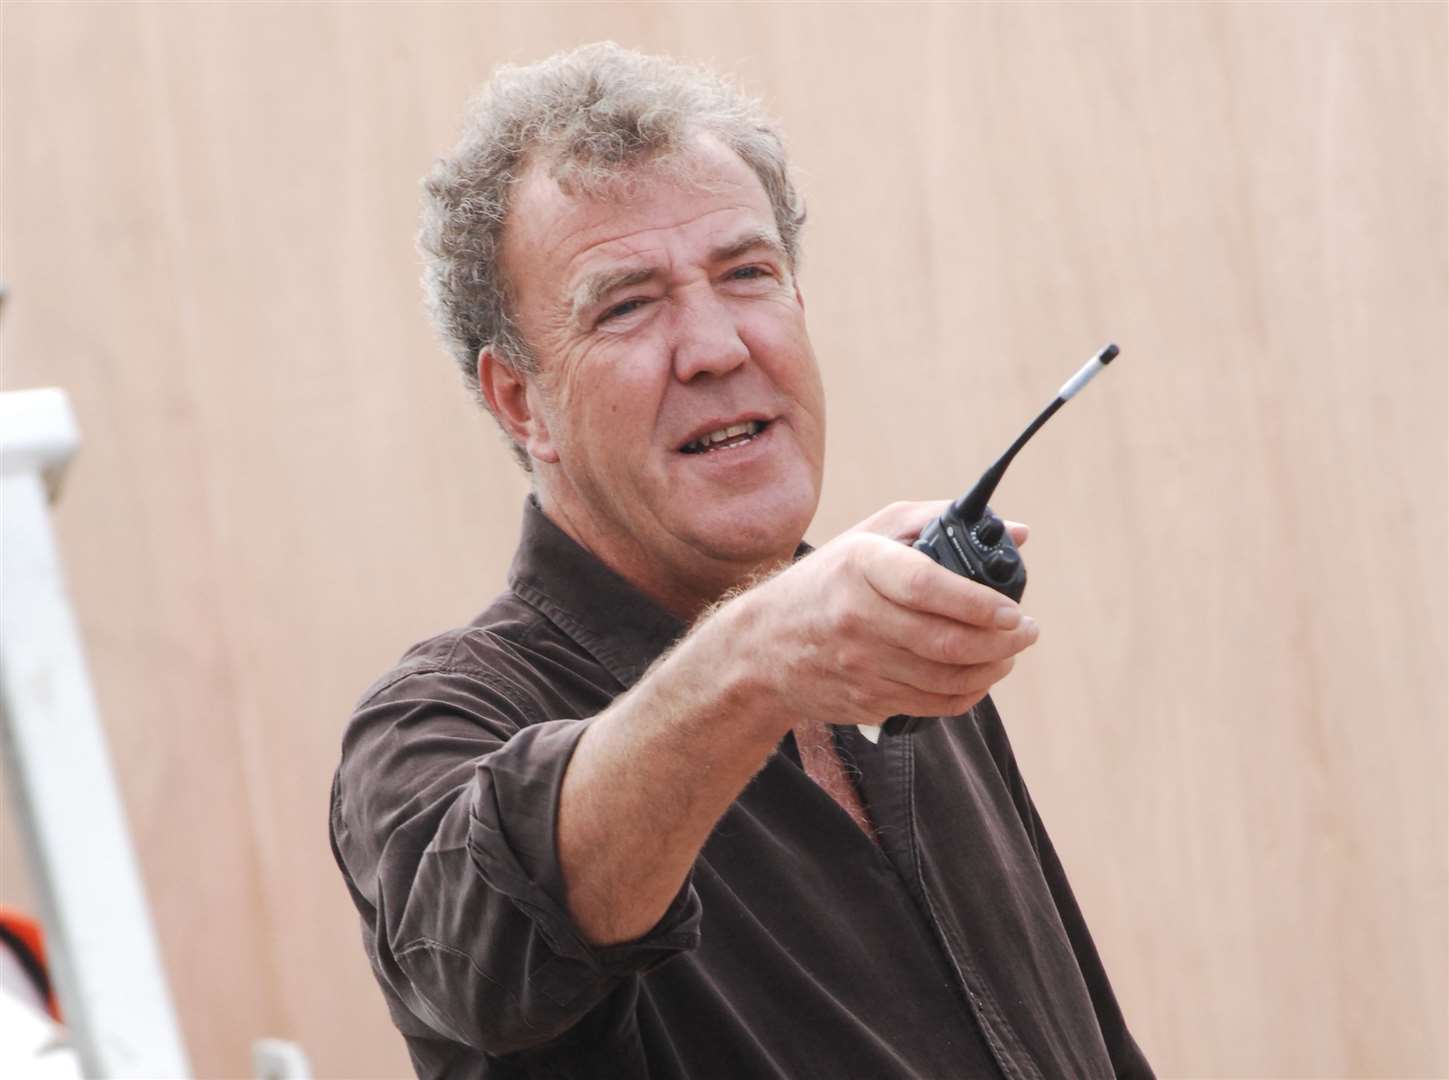 Jeremy Clarkson renovated a barn on his farm in the Cotswolds as part of his Amazon Prime show Clarkson's Farm. Picture: Nick Johnson